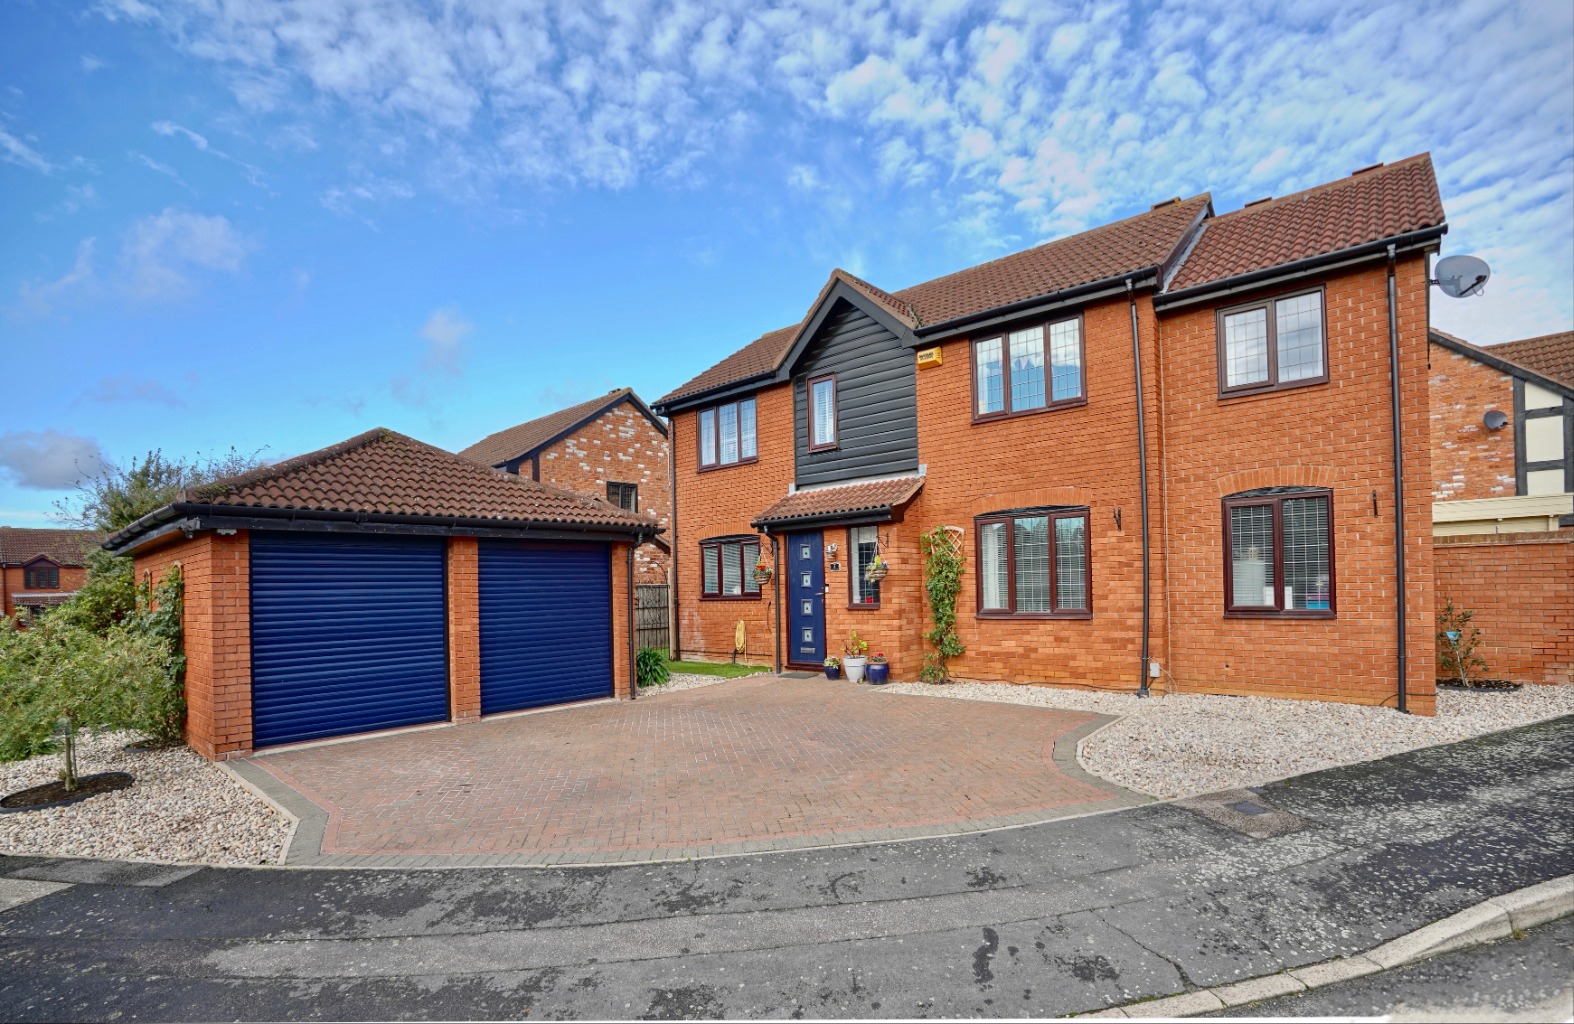 4 bed  for sale in Teversham Way, St. Neots, PE19